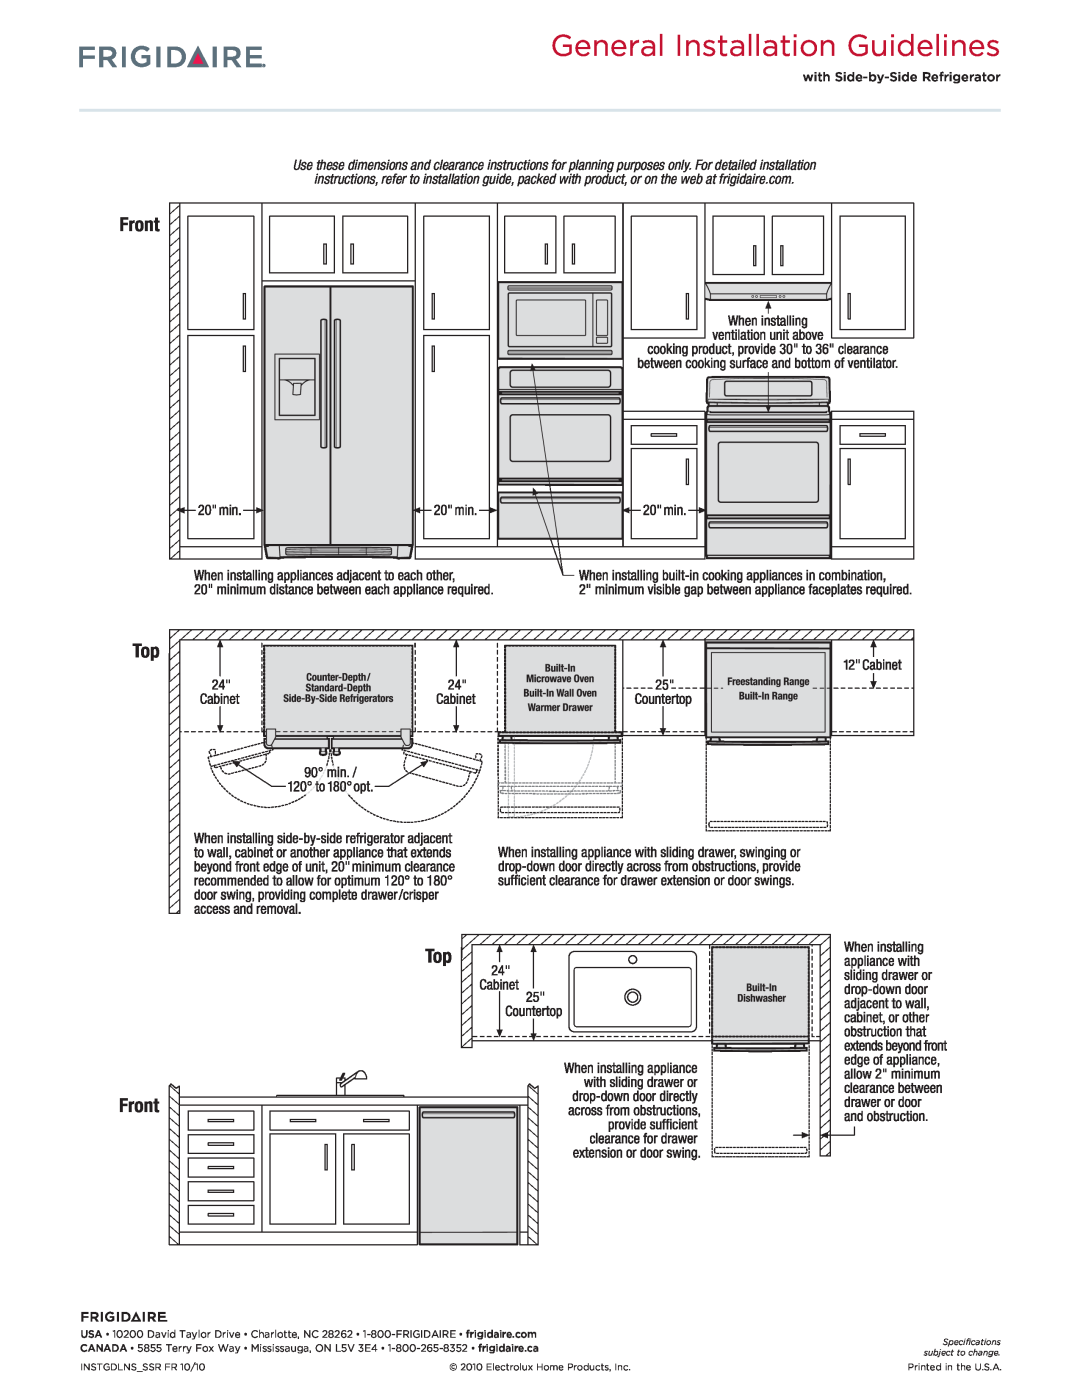 Frigidaire FPES3085K F dimensions General Installation Guidelines, Top Front 